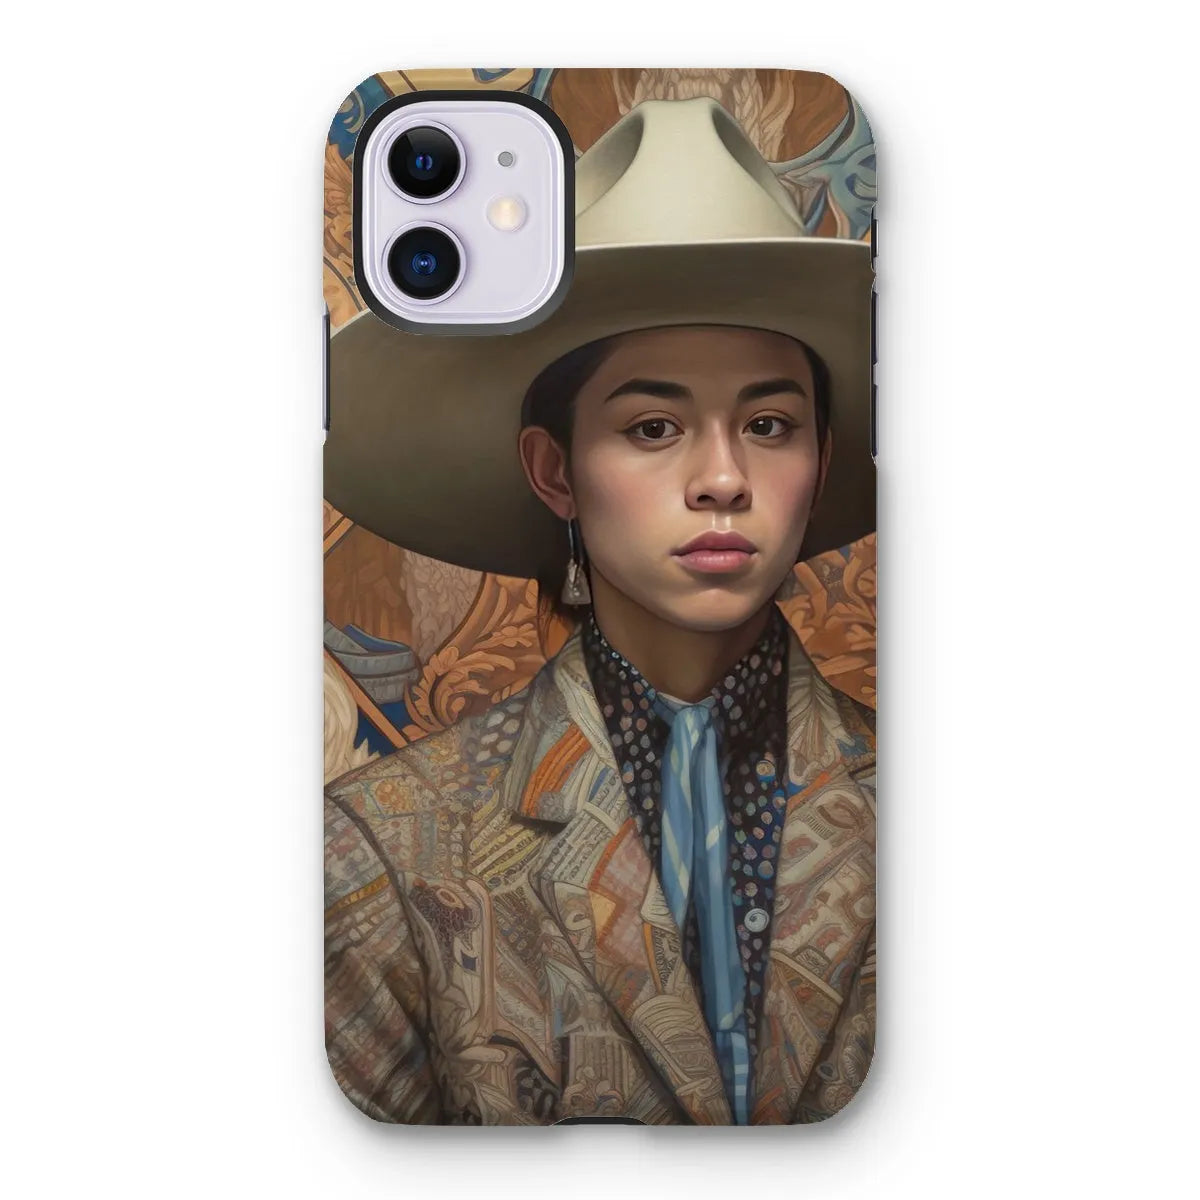 Angel The Transgender Cowboy - F2m Outlaw Art Phone Case - Iphone 11 / Matte - Mobile Phone Cases - Aesthetic Art